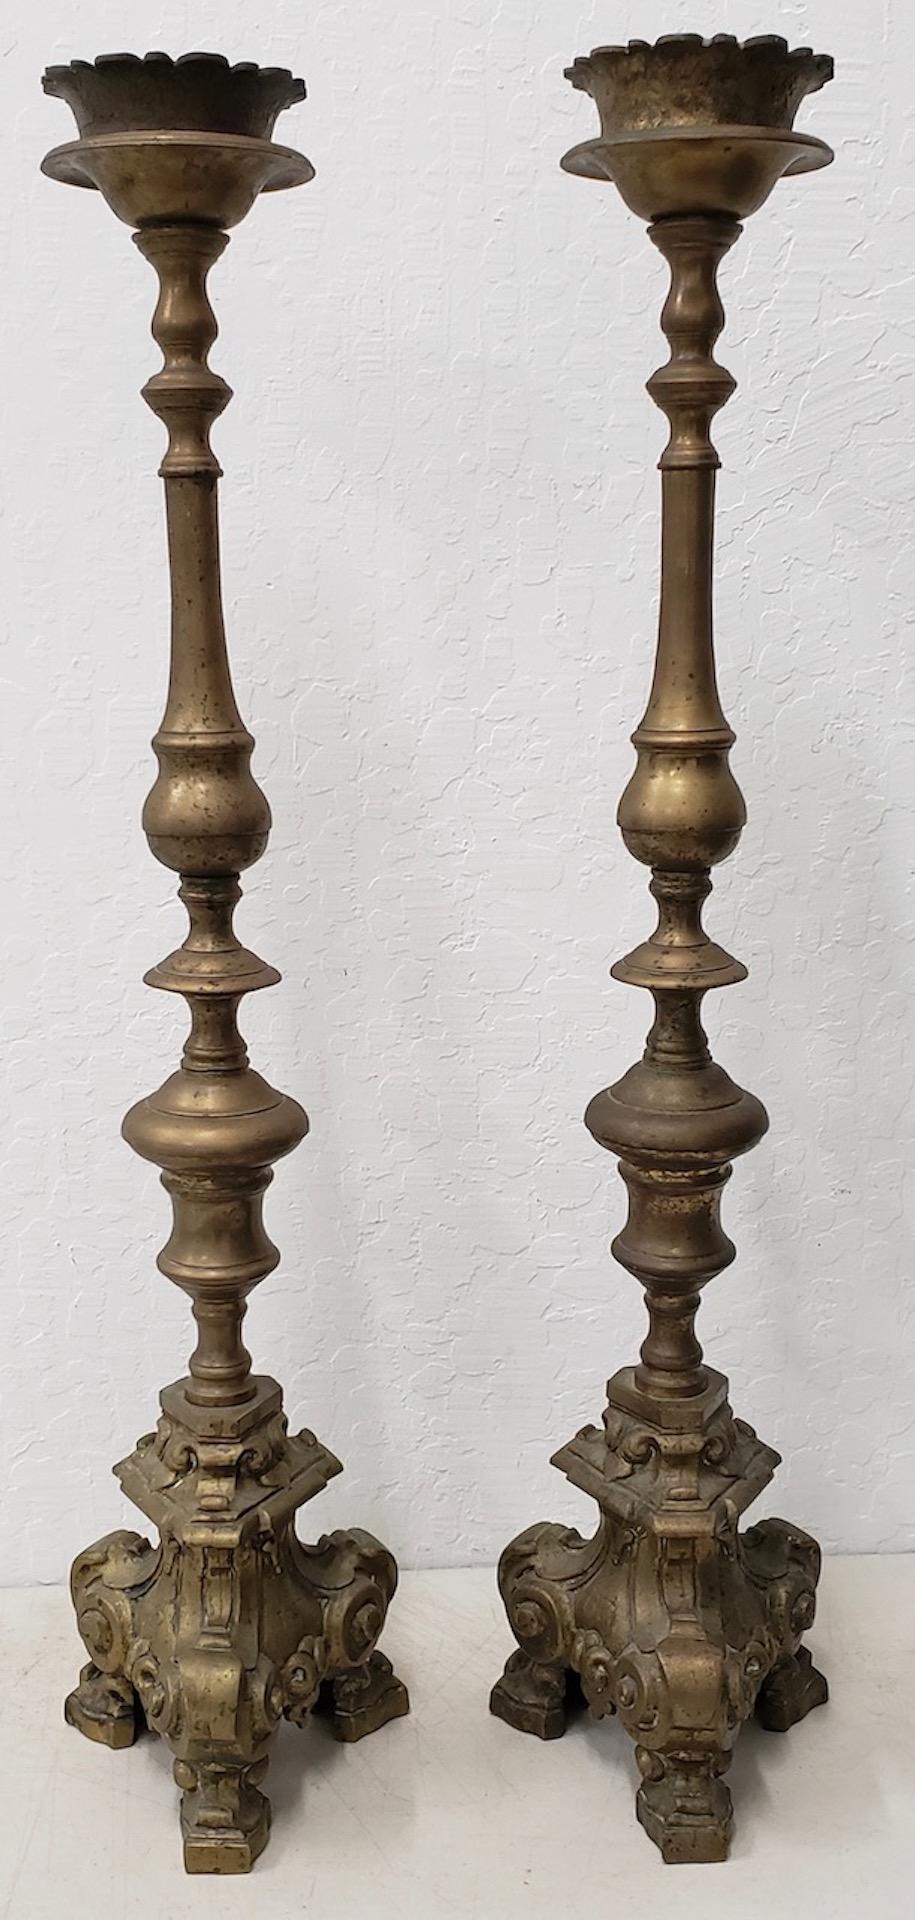 Pair of early 18th century brass Altar / mantel candleholders, circa 1717

Superb pair of candle holder. Hand made from solid brass. The base shows the date 1717.

Each large candle holder measures 7